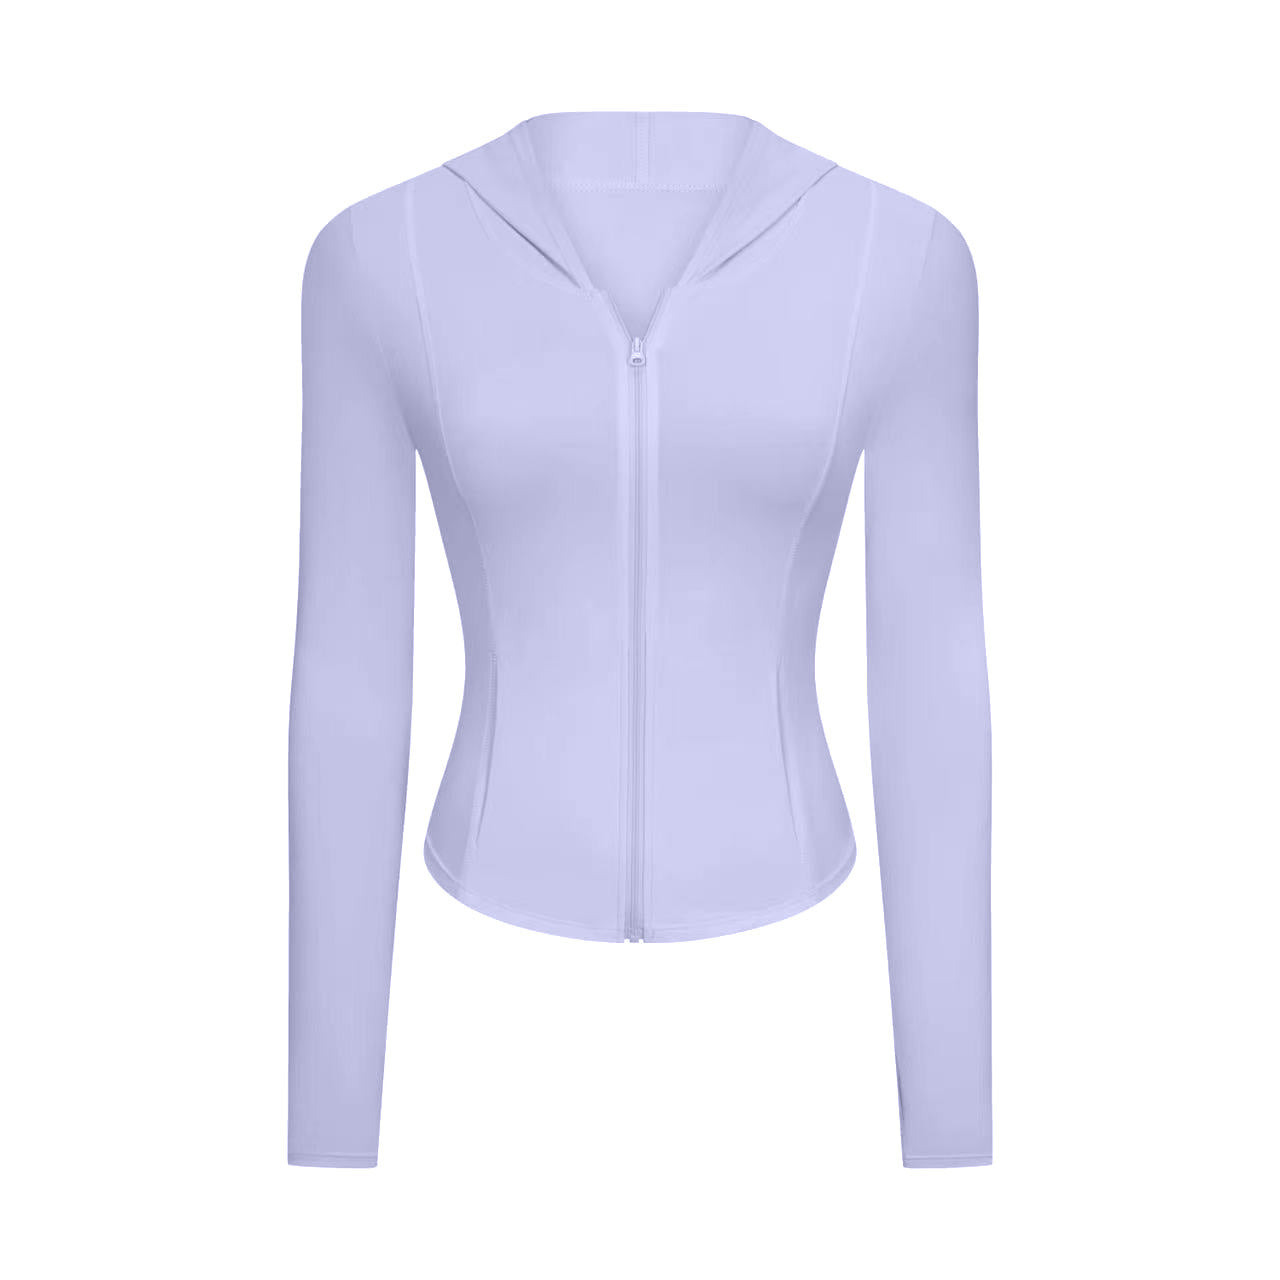 Slim Fit Zipper Hoodie Running and Quick Drying Fitness Top